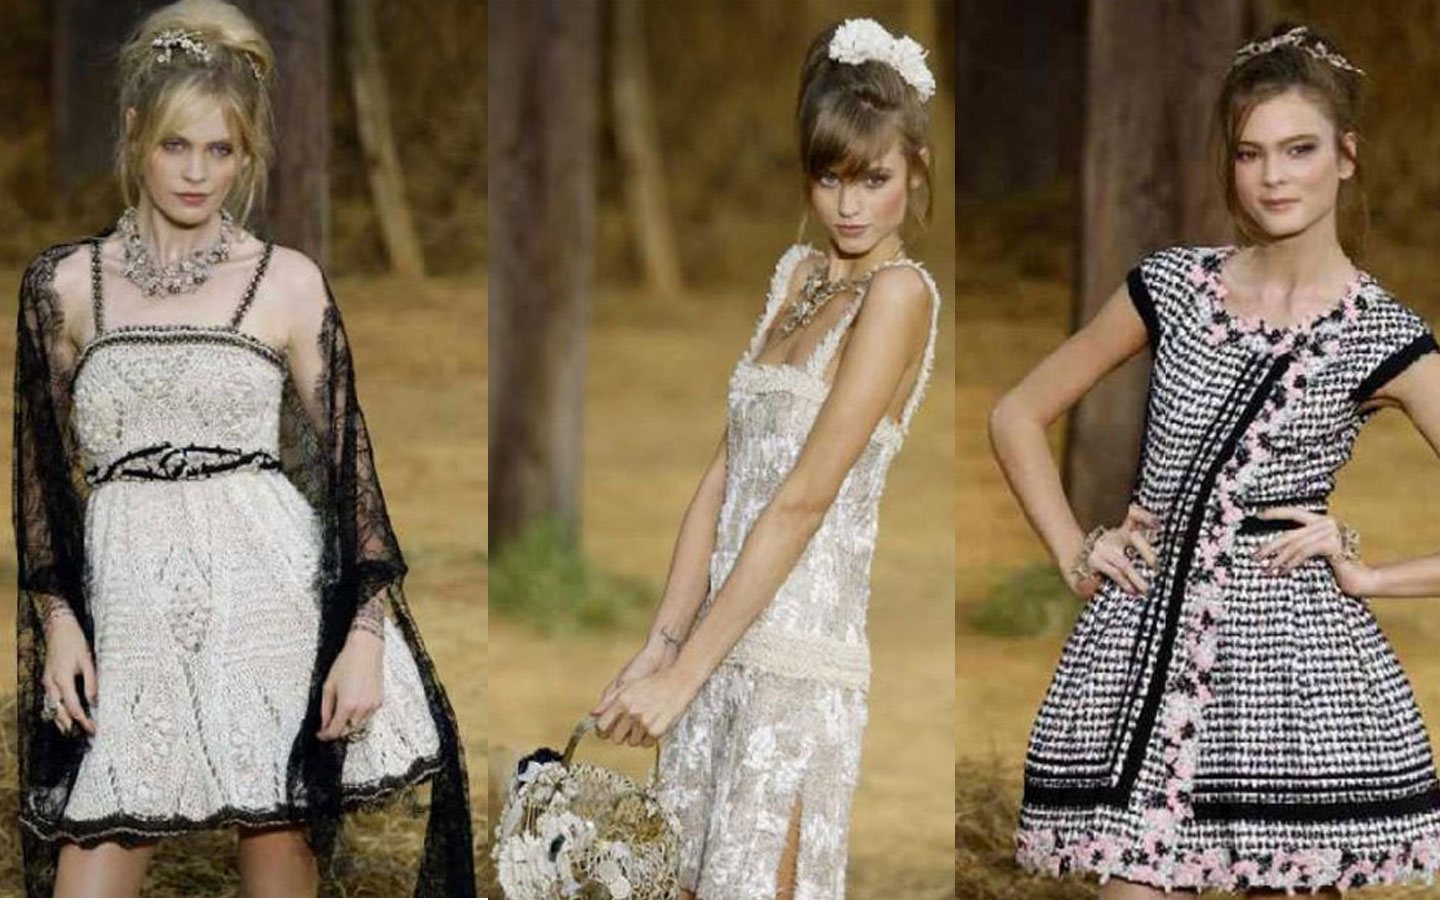 Sweet dresses for the countryside